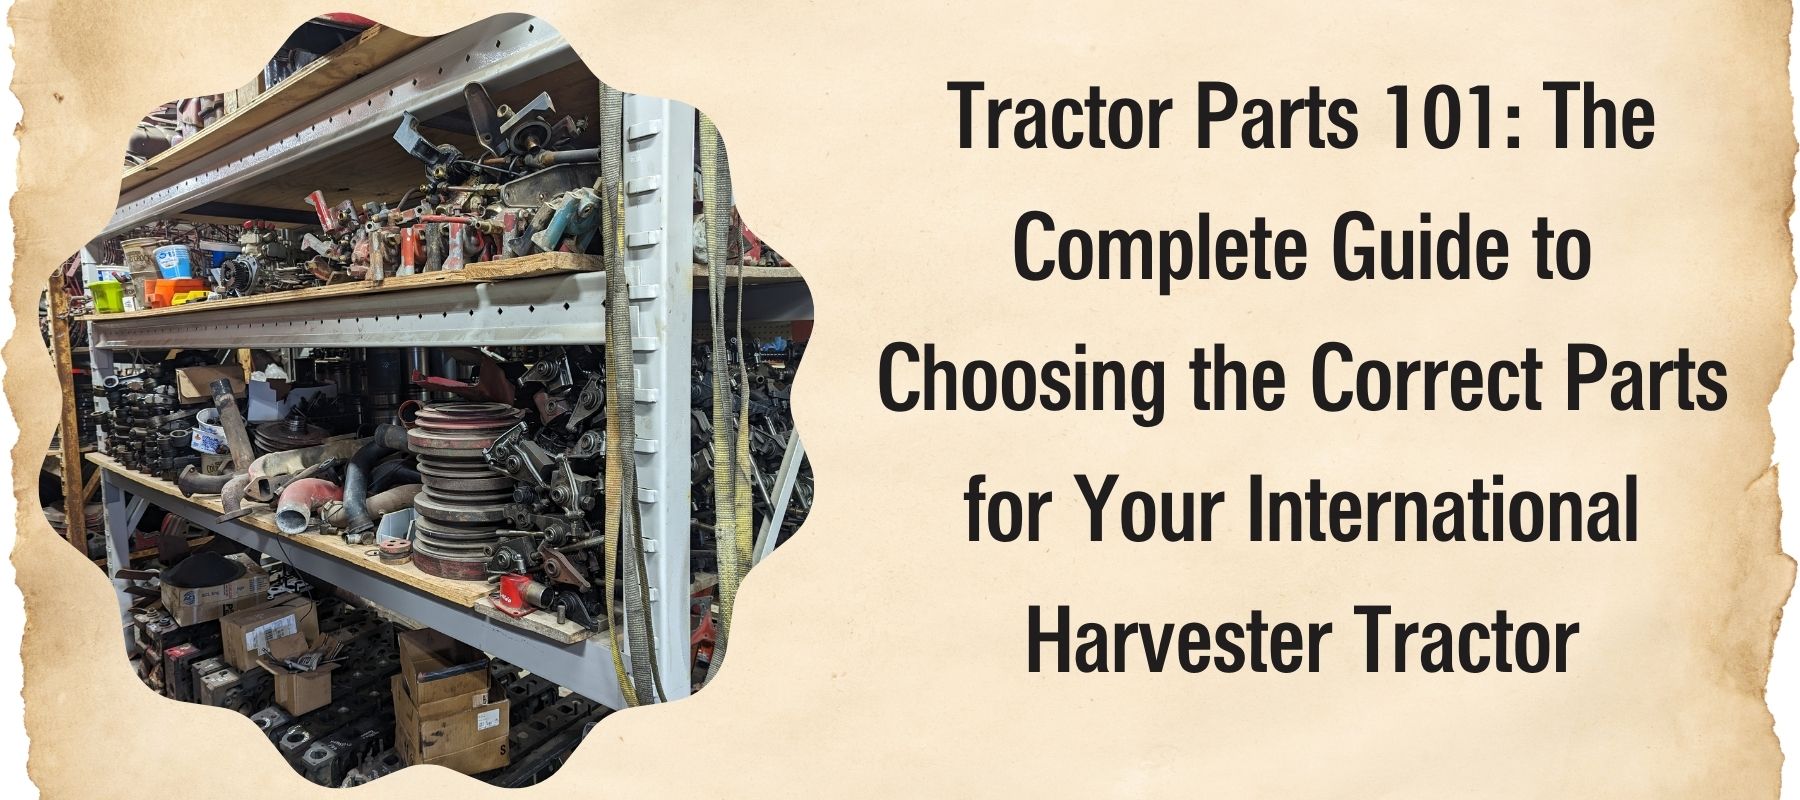 Tractor Parts 101: The Complete Guide to Choosing the Correct Parts for Your International Harvester Tractor - Hines Equipment Repair & Parts